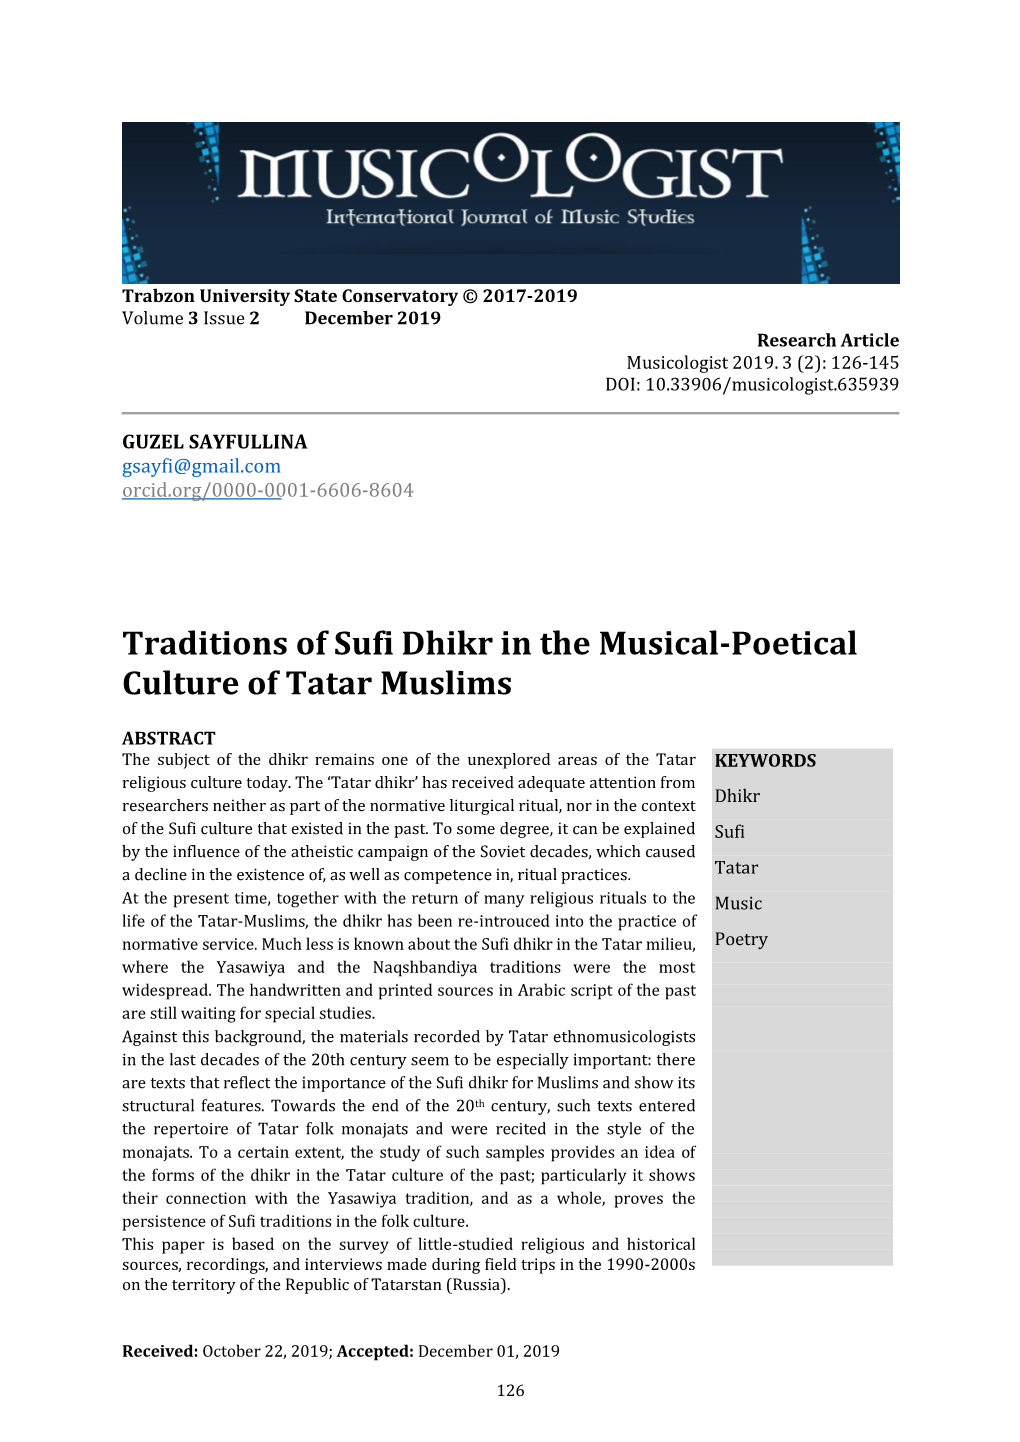 Traditions of Sufi Dhikr in the Musical-Poetical Culture of Tatar Muslims